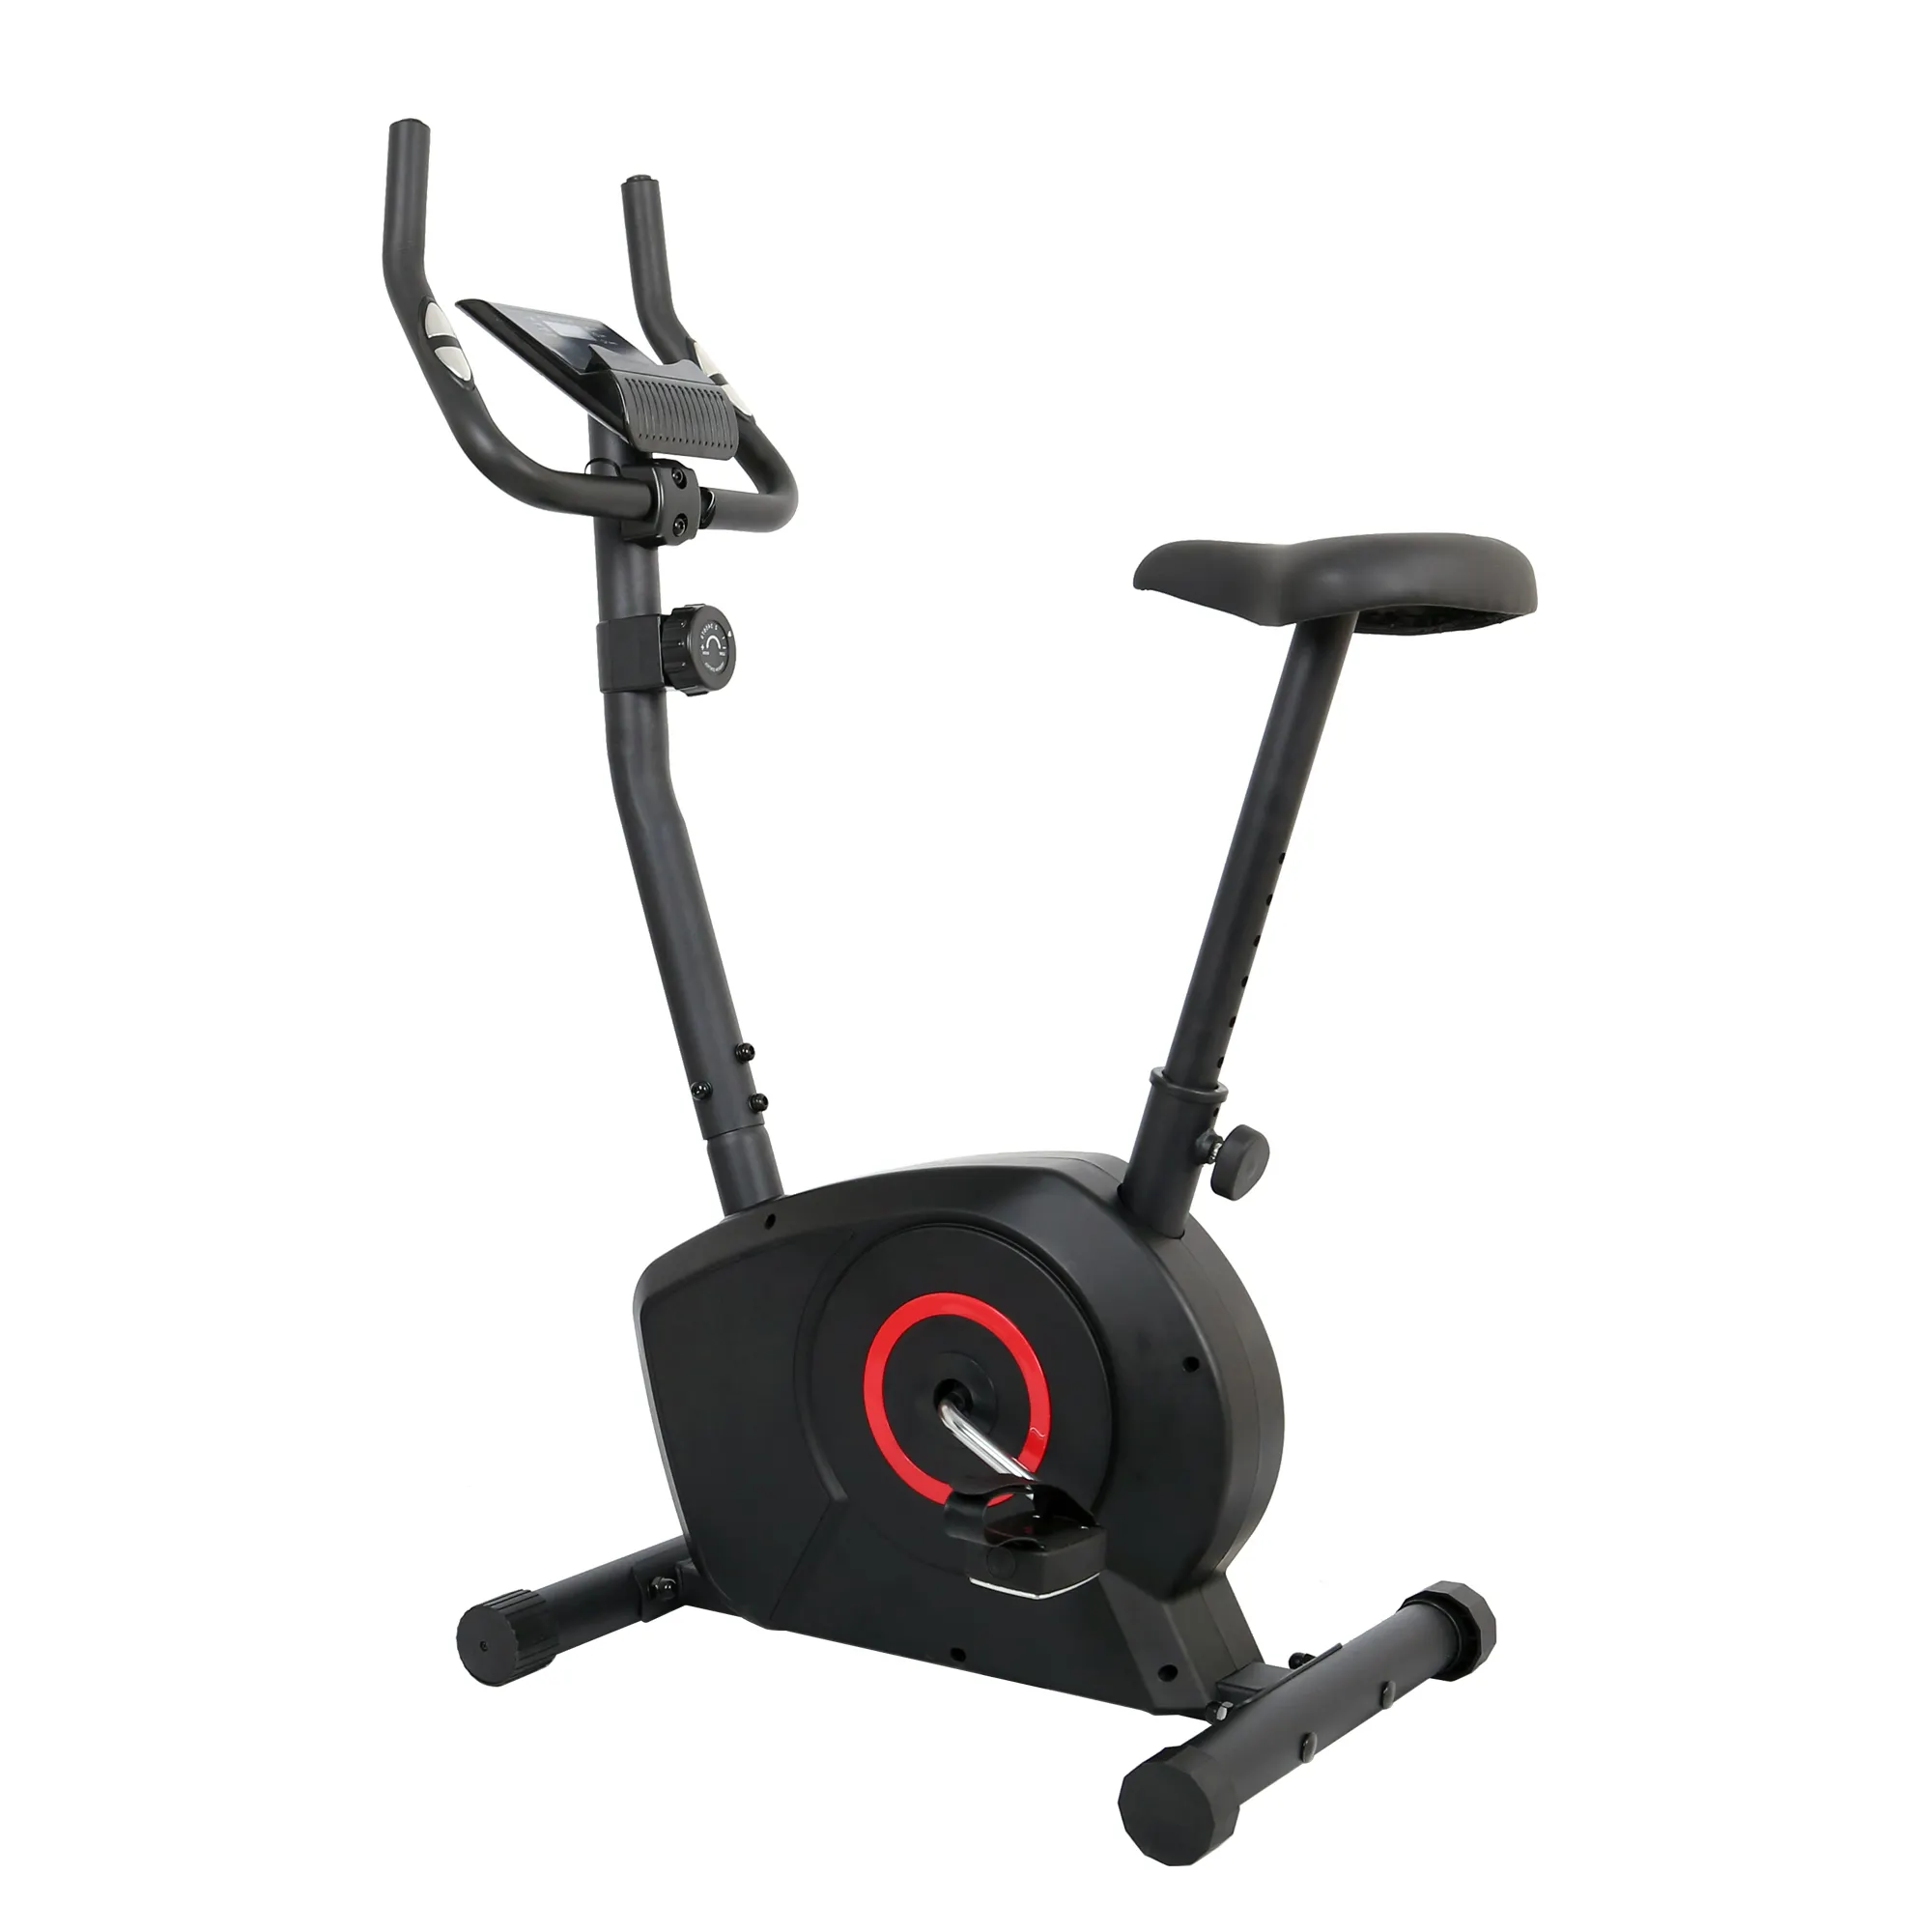 Fitness Exercise Bike House Indoor Fitness Machine Magnetic Exercise Bike Life Gear Lightweight Sports Stationary Bike